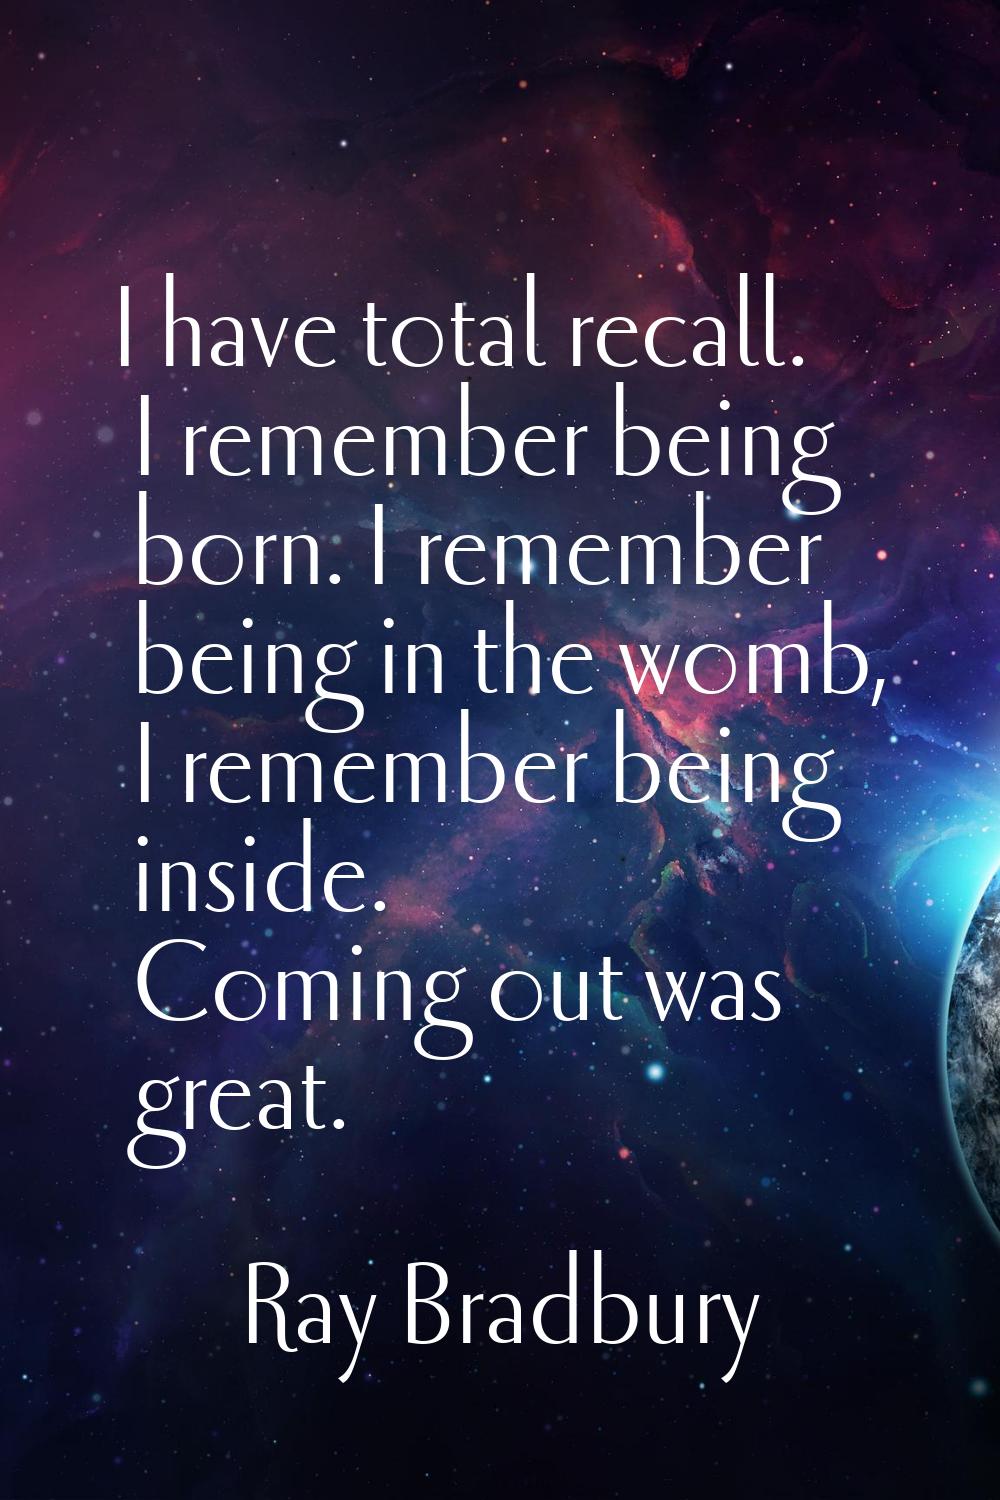 I have total recall. I remember being born. I remember being in the womb, I remember being inside. 